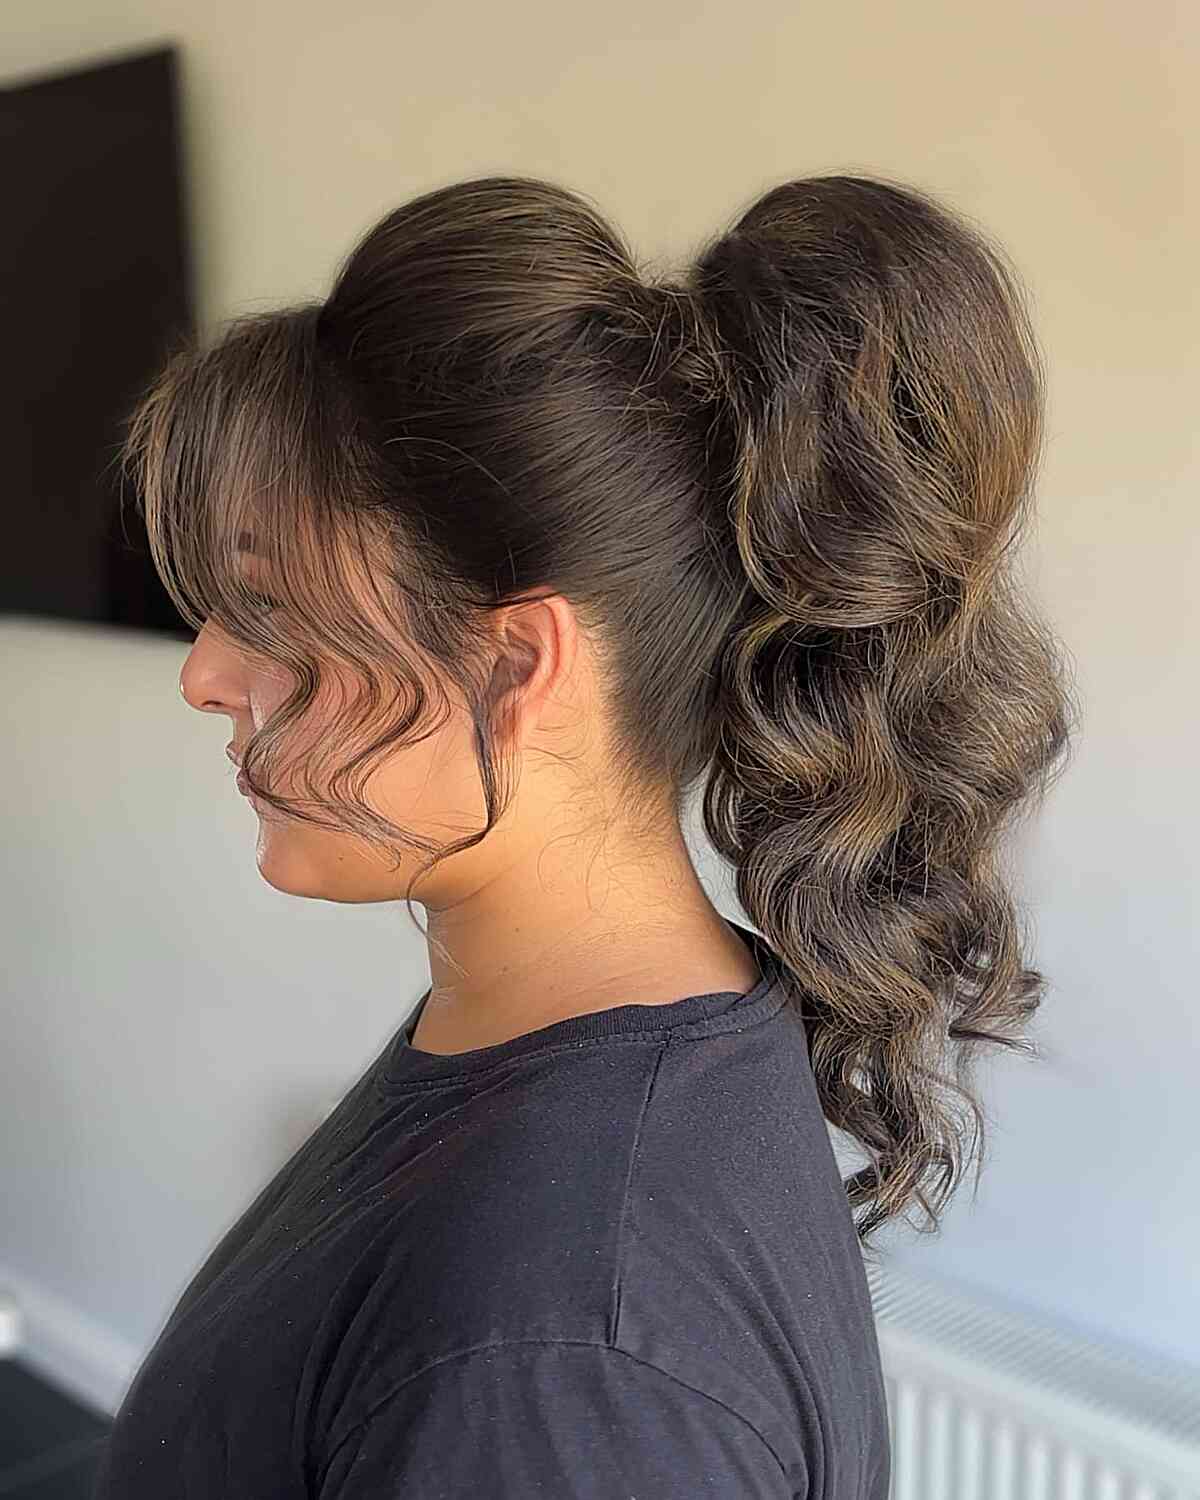 30 Easy Ponytail Hairstyles - Best Ideas for Ponytail Styles